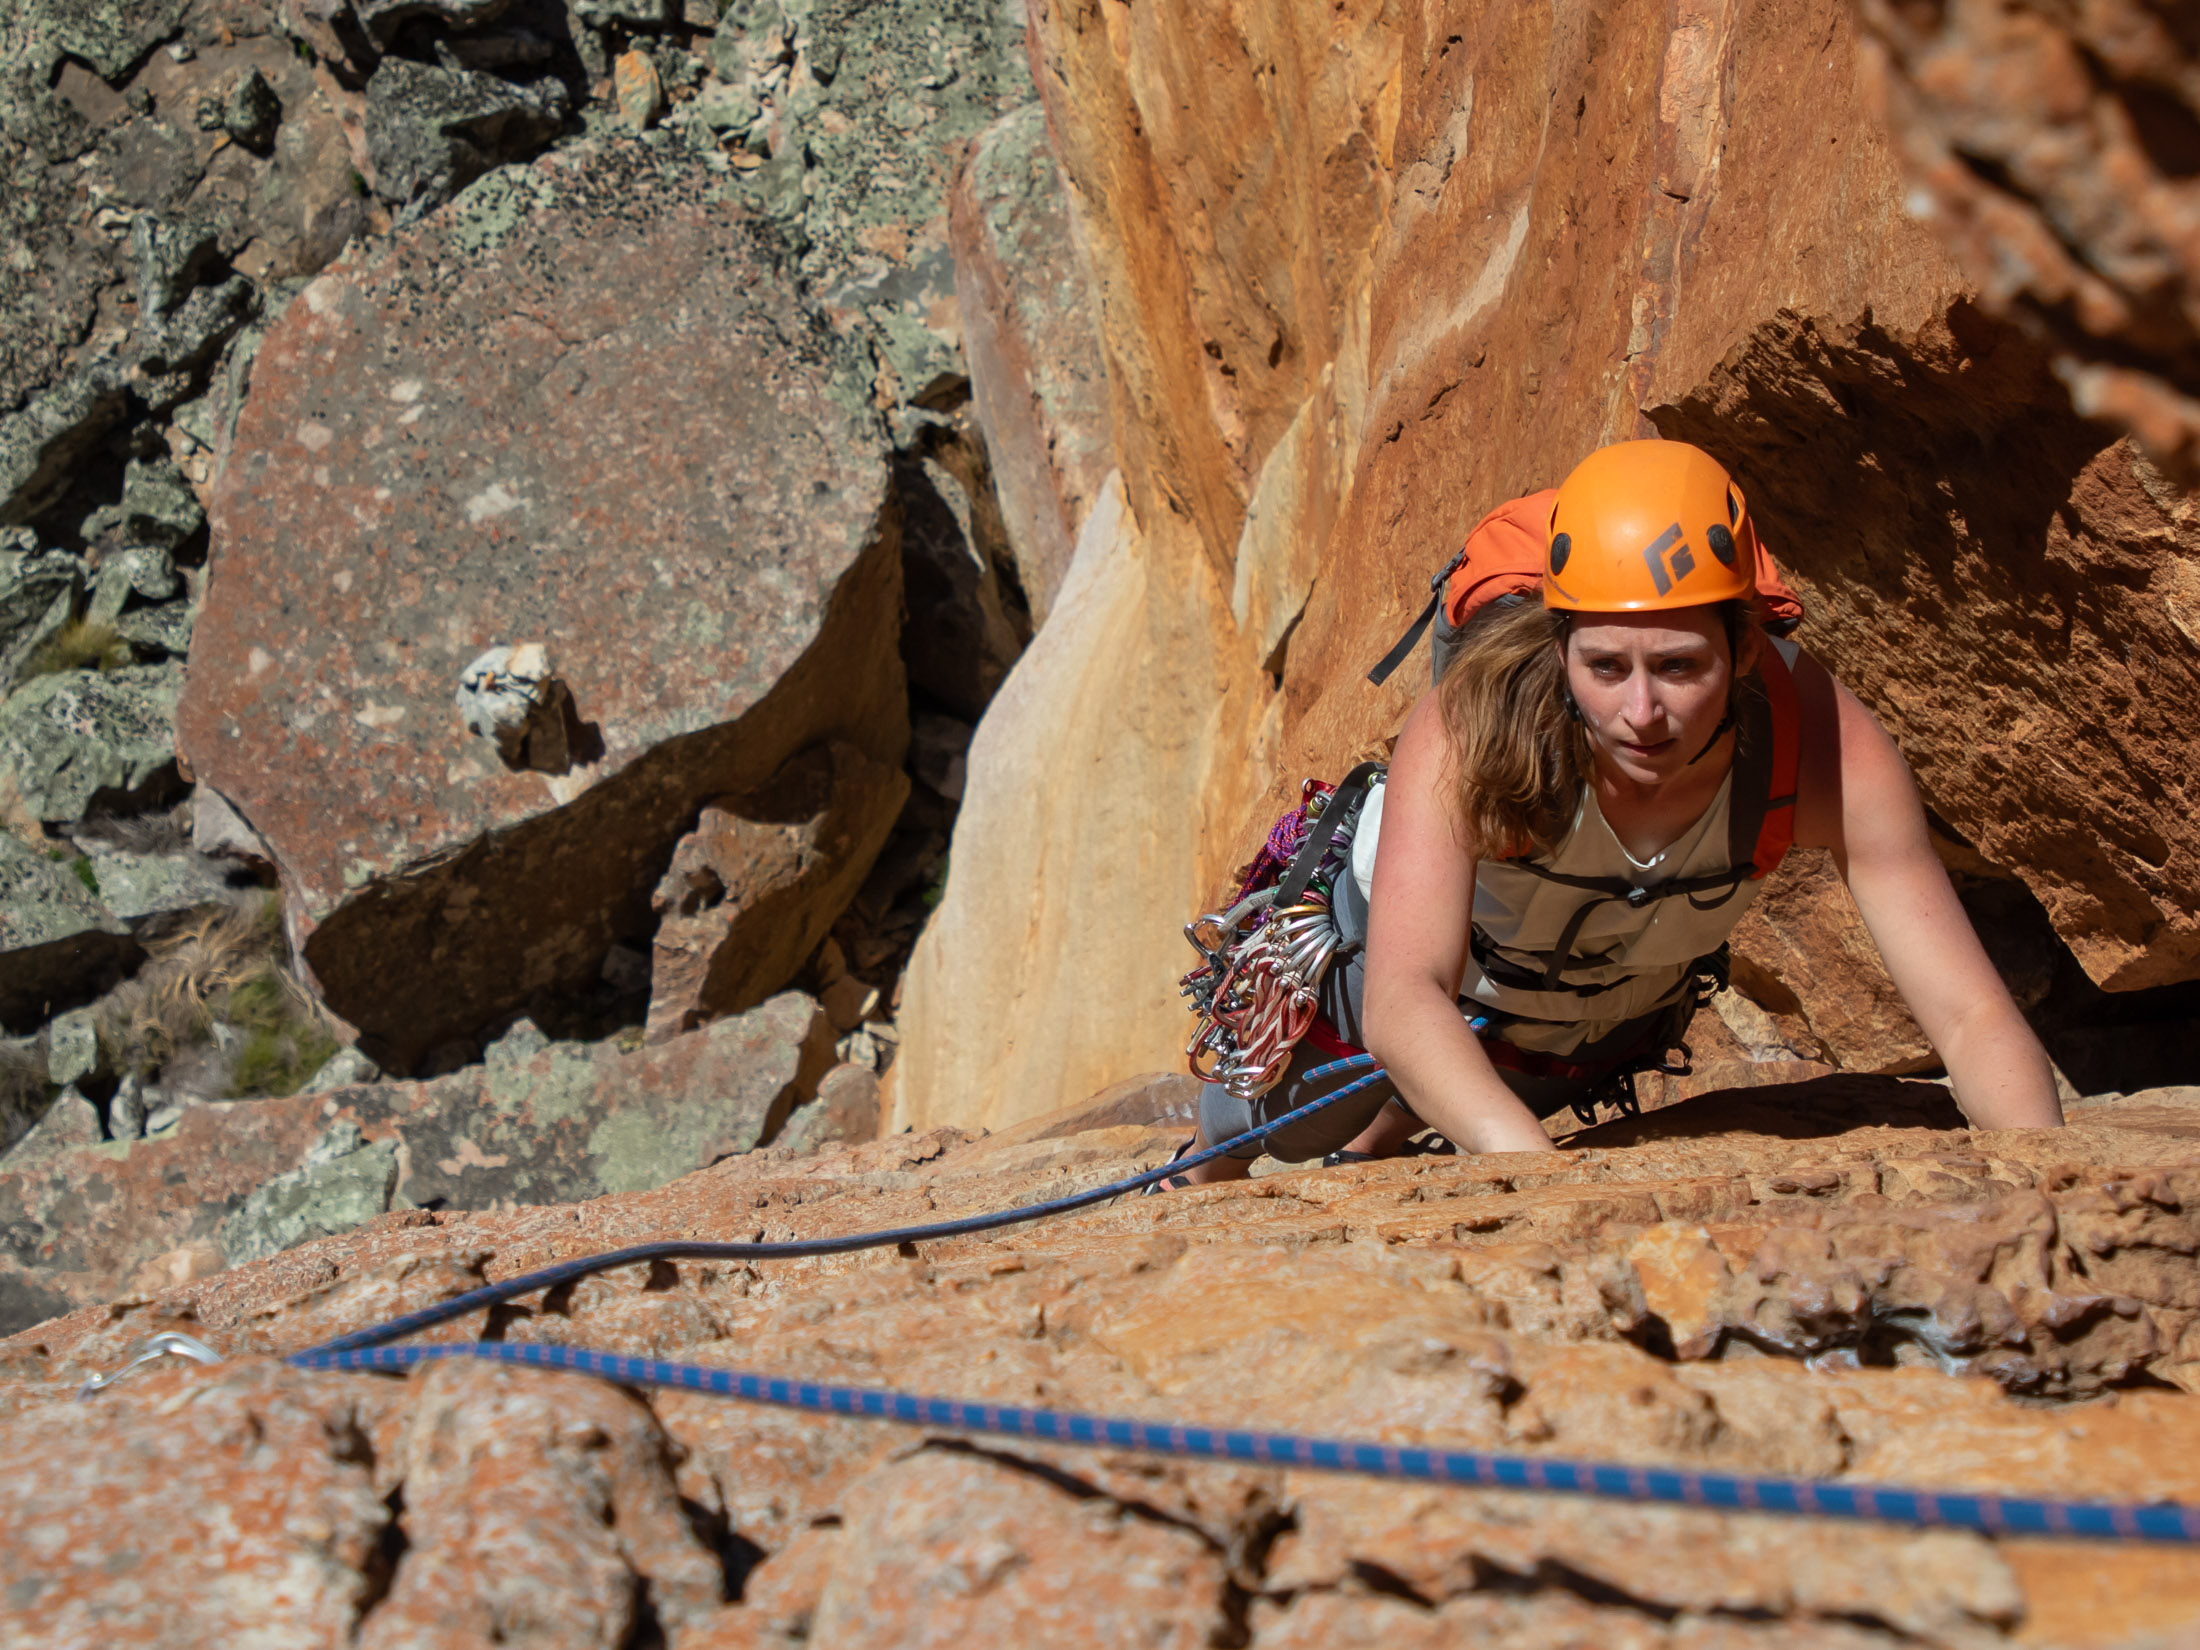 Climber following on Cederberg route